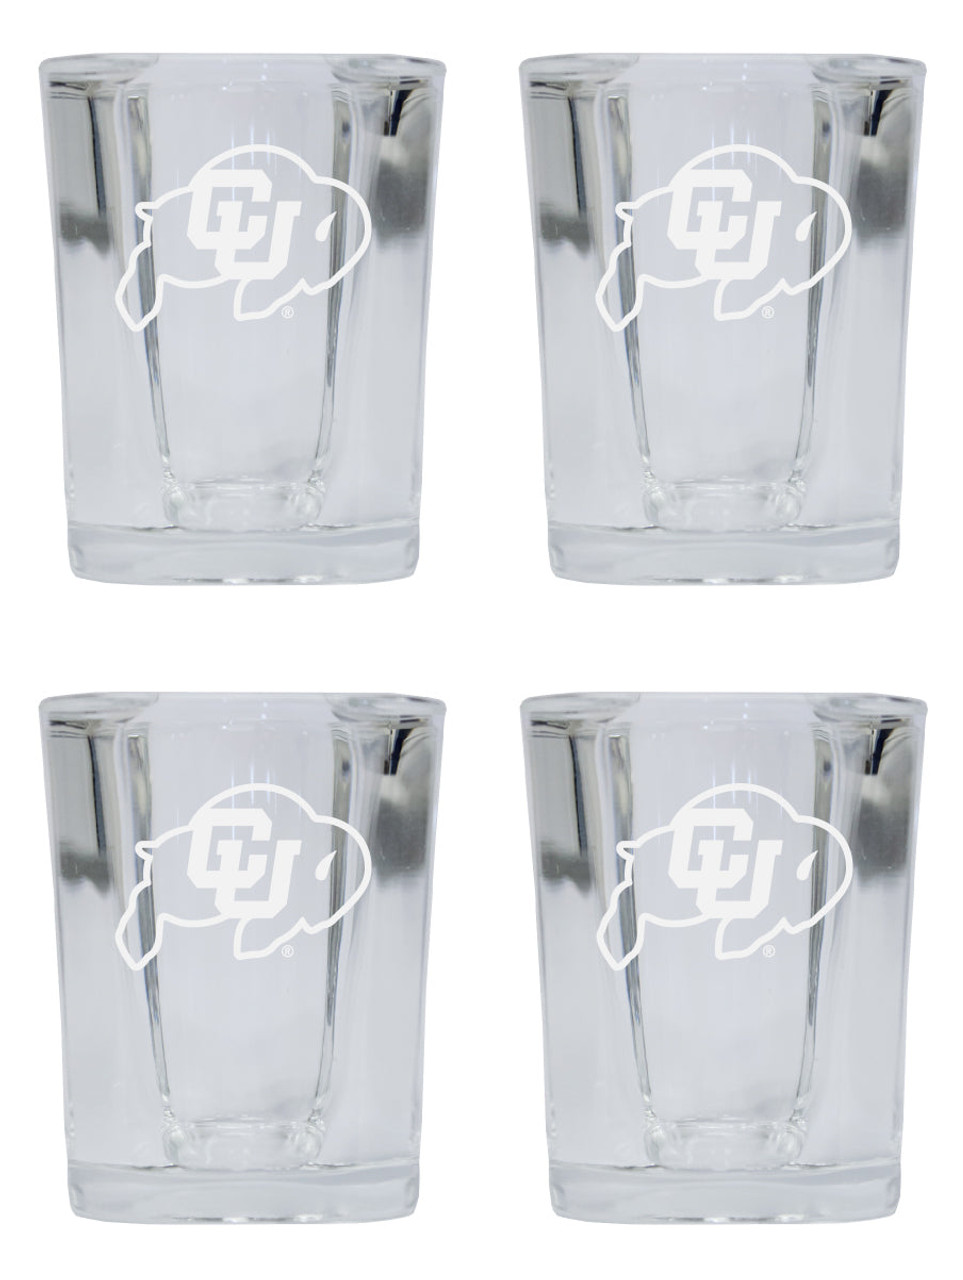 Colorado Buffaloes 2 Ounce Square Shot Glass laser etched logo Design 4-Pack